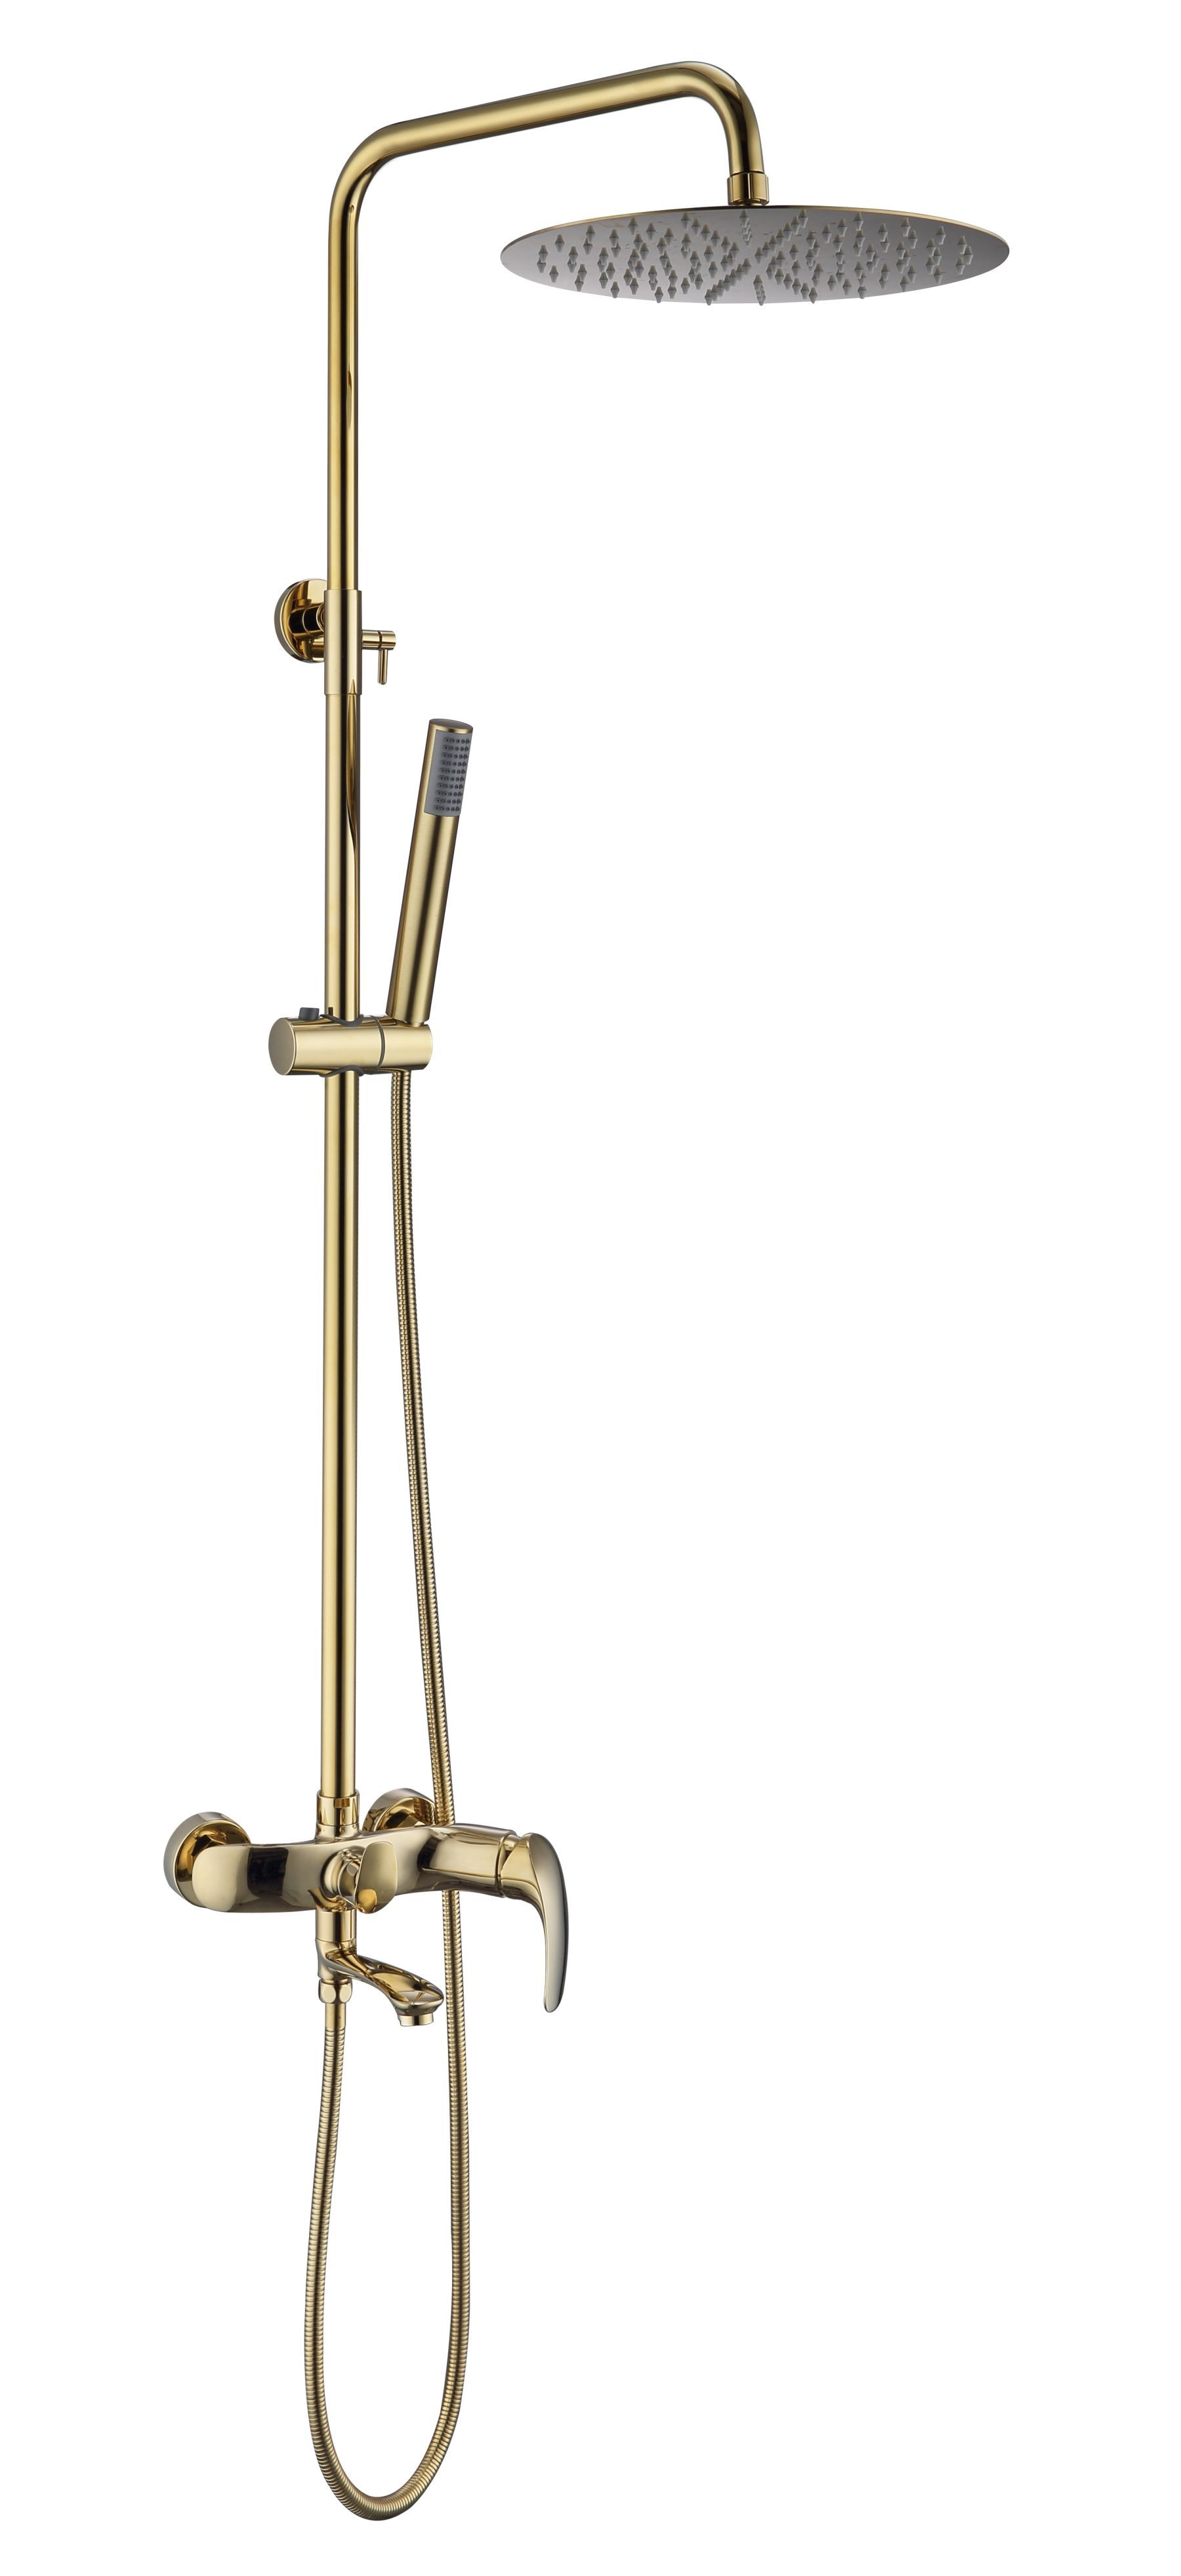 Deluxe Gold Shower Bath Fitter